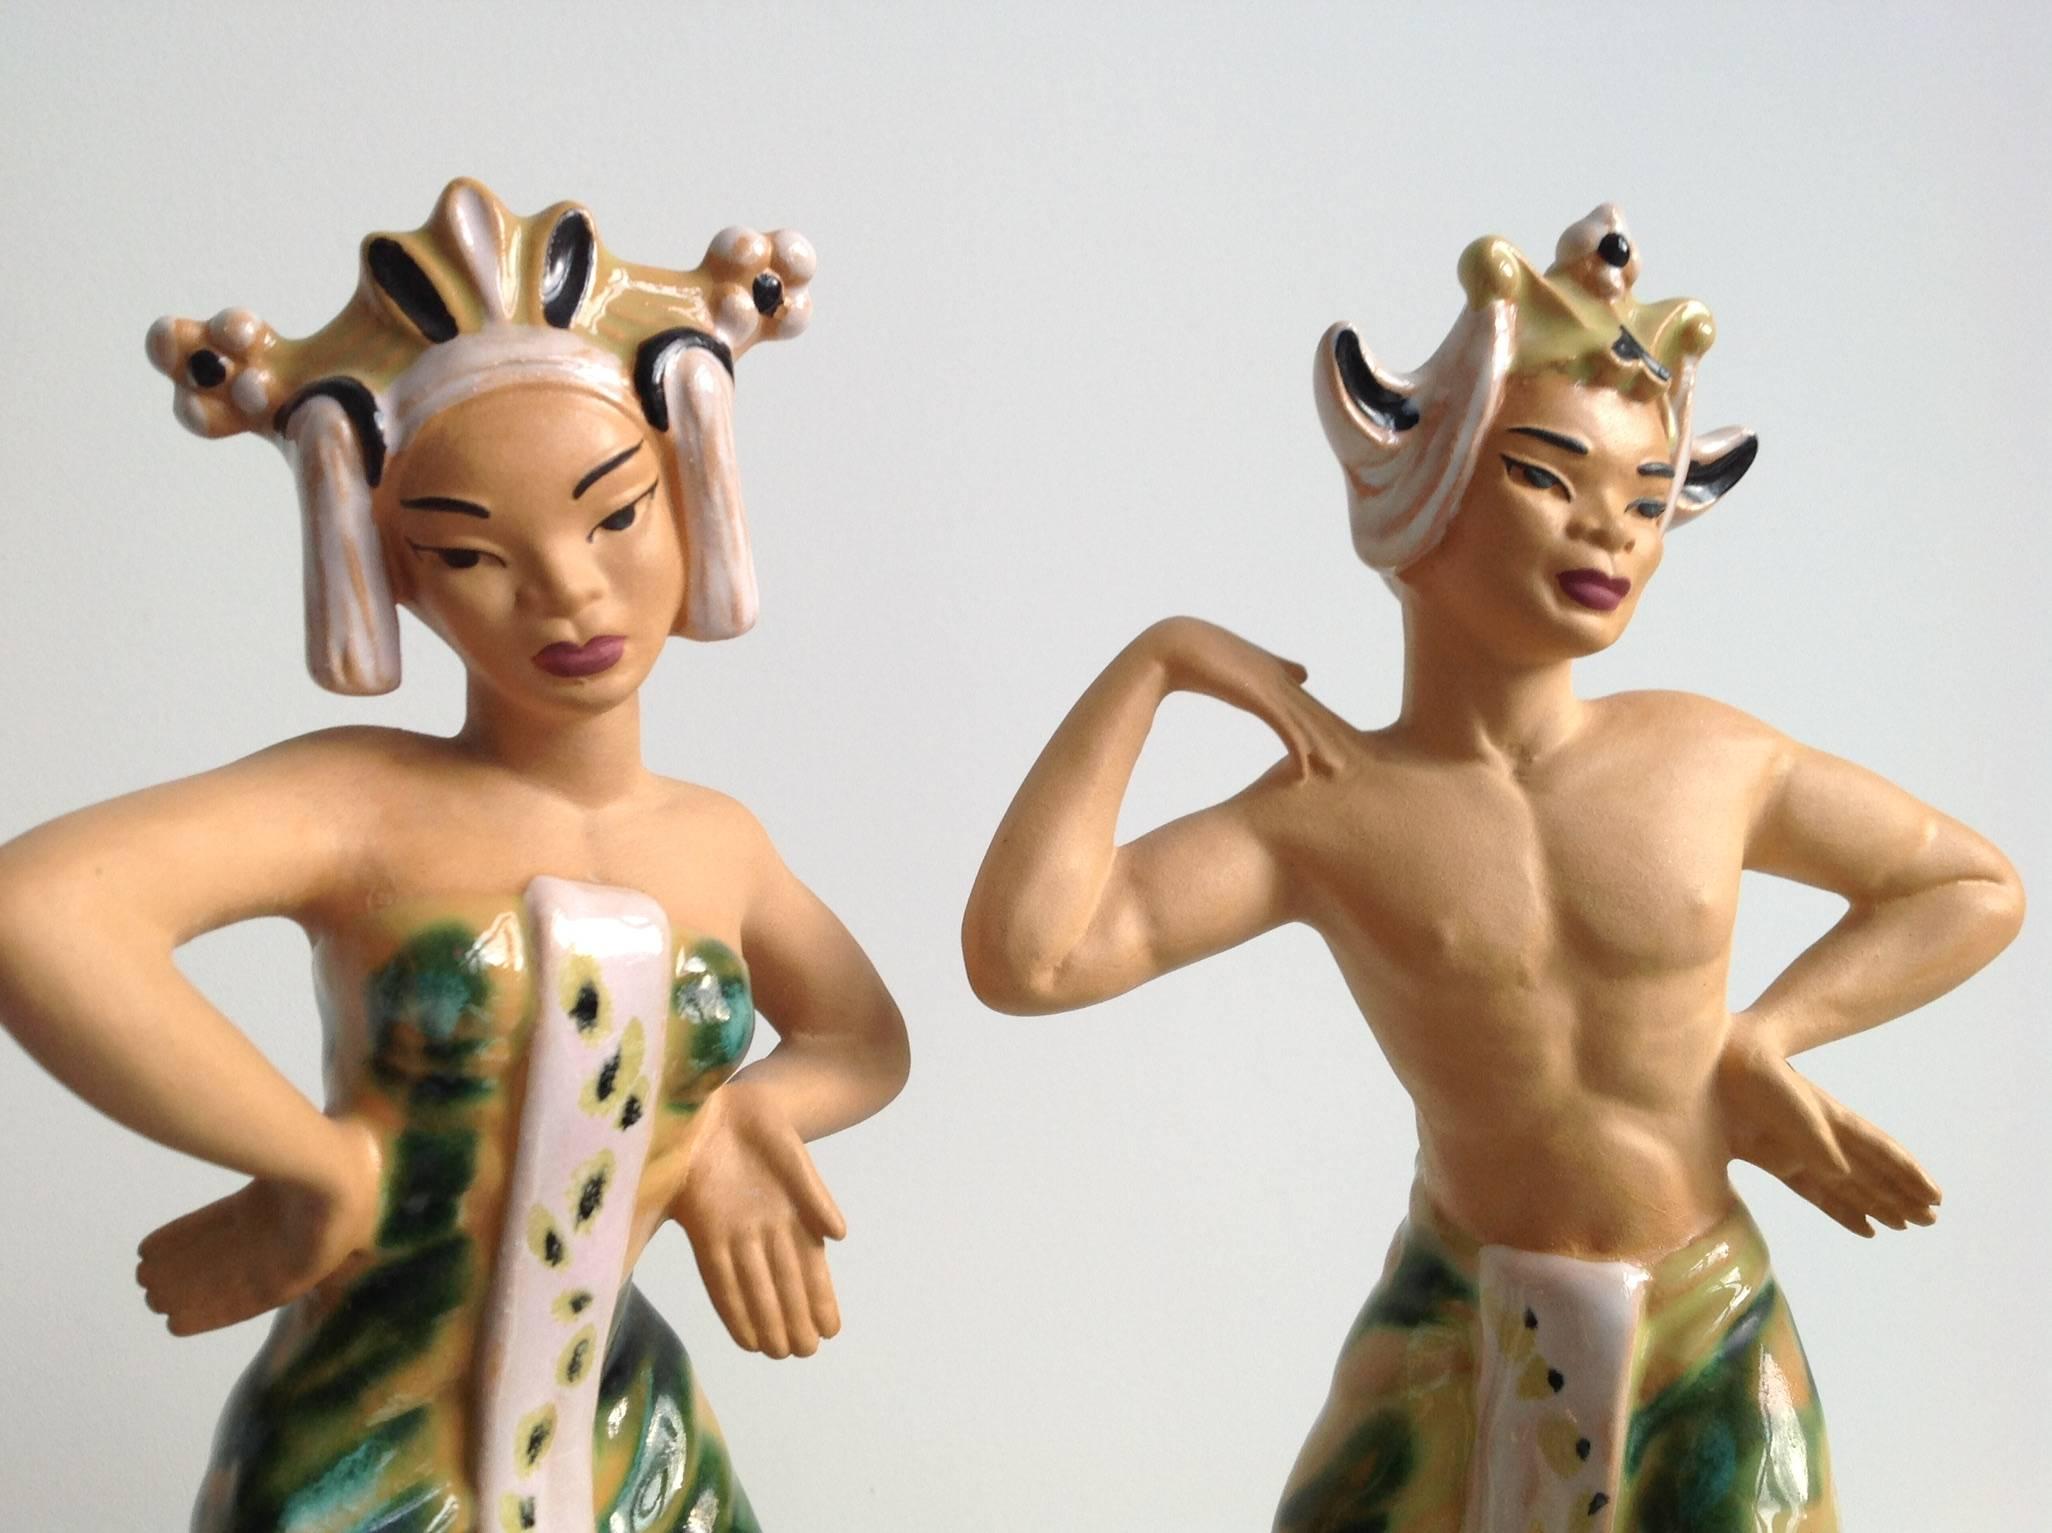 A striking Balinese dance couple of polychrome pottery, designed by the American Betty Harrington at
Ceramic Arts Studio of Madison(CAS). Since the 1930s the island of Bali in Indonesia was discovered as
the last paradise on earth, because the